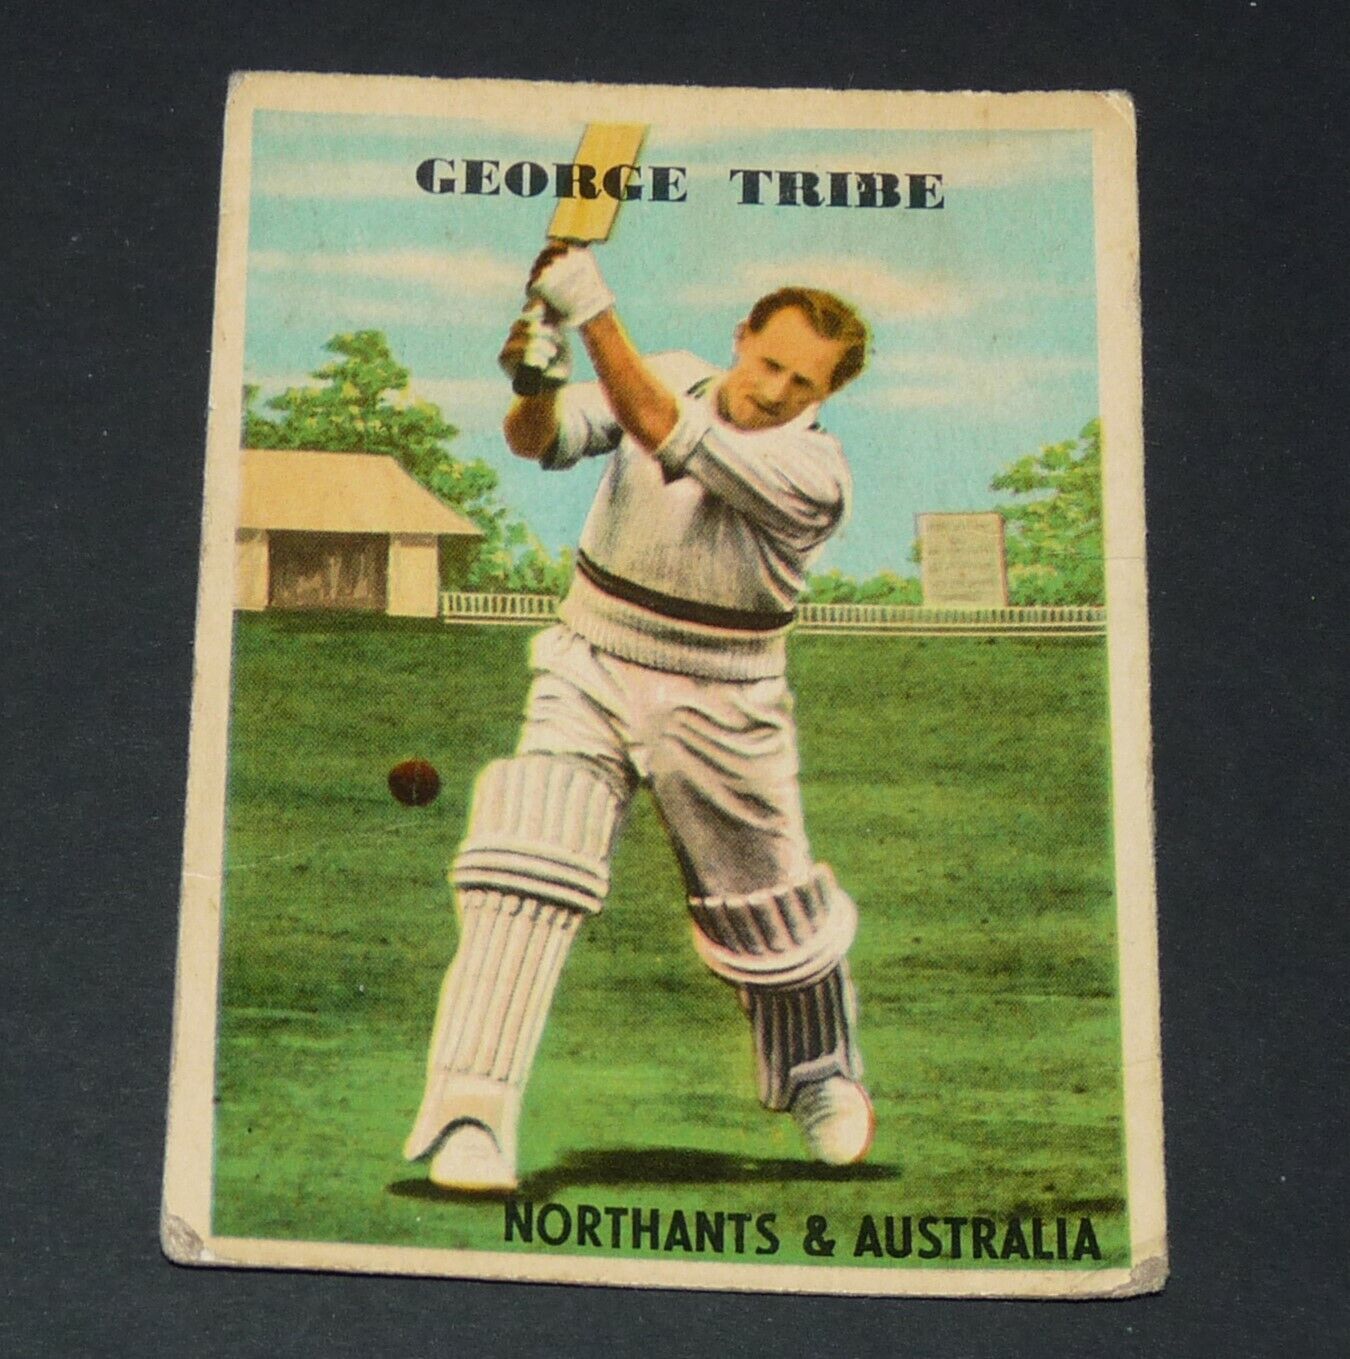 1961 A & BC CARD CRICKETERS GEORGE TRIBE NORTHAMPTONSHIRE AUSTRALIA CRICKET